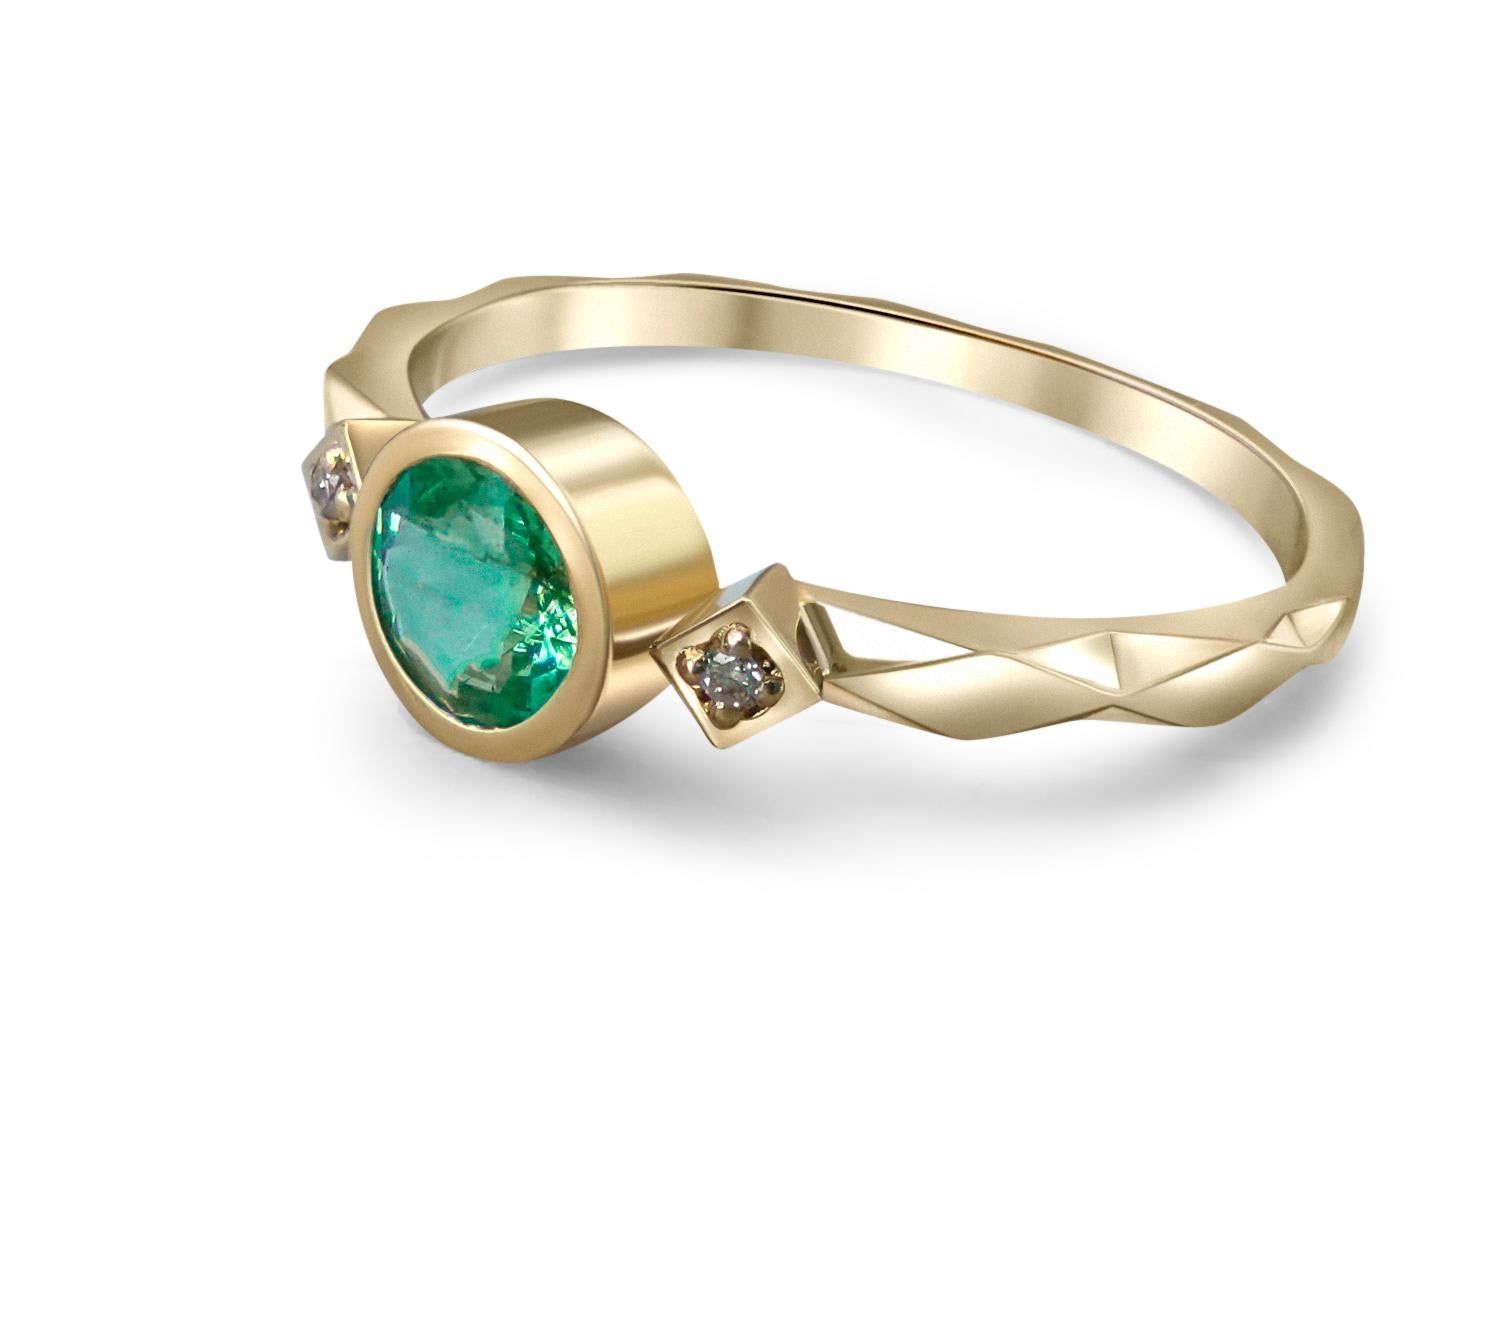 Emerald 14k gold ring. 
Minimalist emerald ring. Real emerald ring. Stackable emerald ring. Round Emerald ring. 3 gemstone ring.

Metal: 14 karat gold.
Weight: 1.4 gr (depends from size).

Gemstones:
Emerald: round cut, green color, transparent with